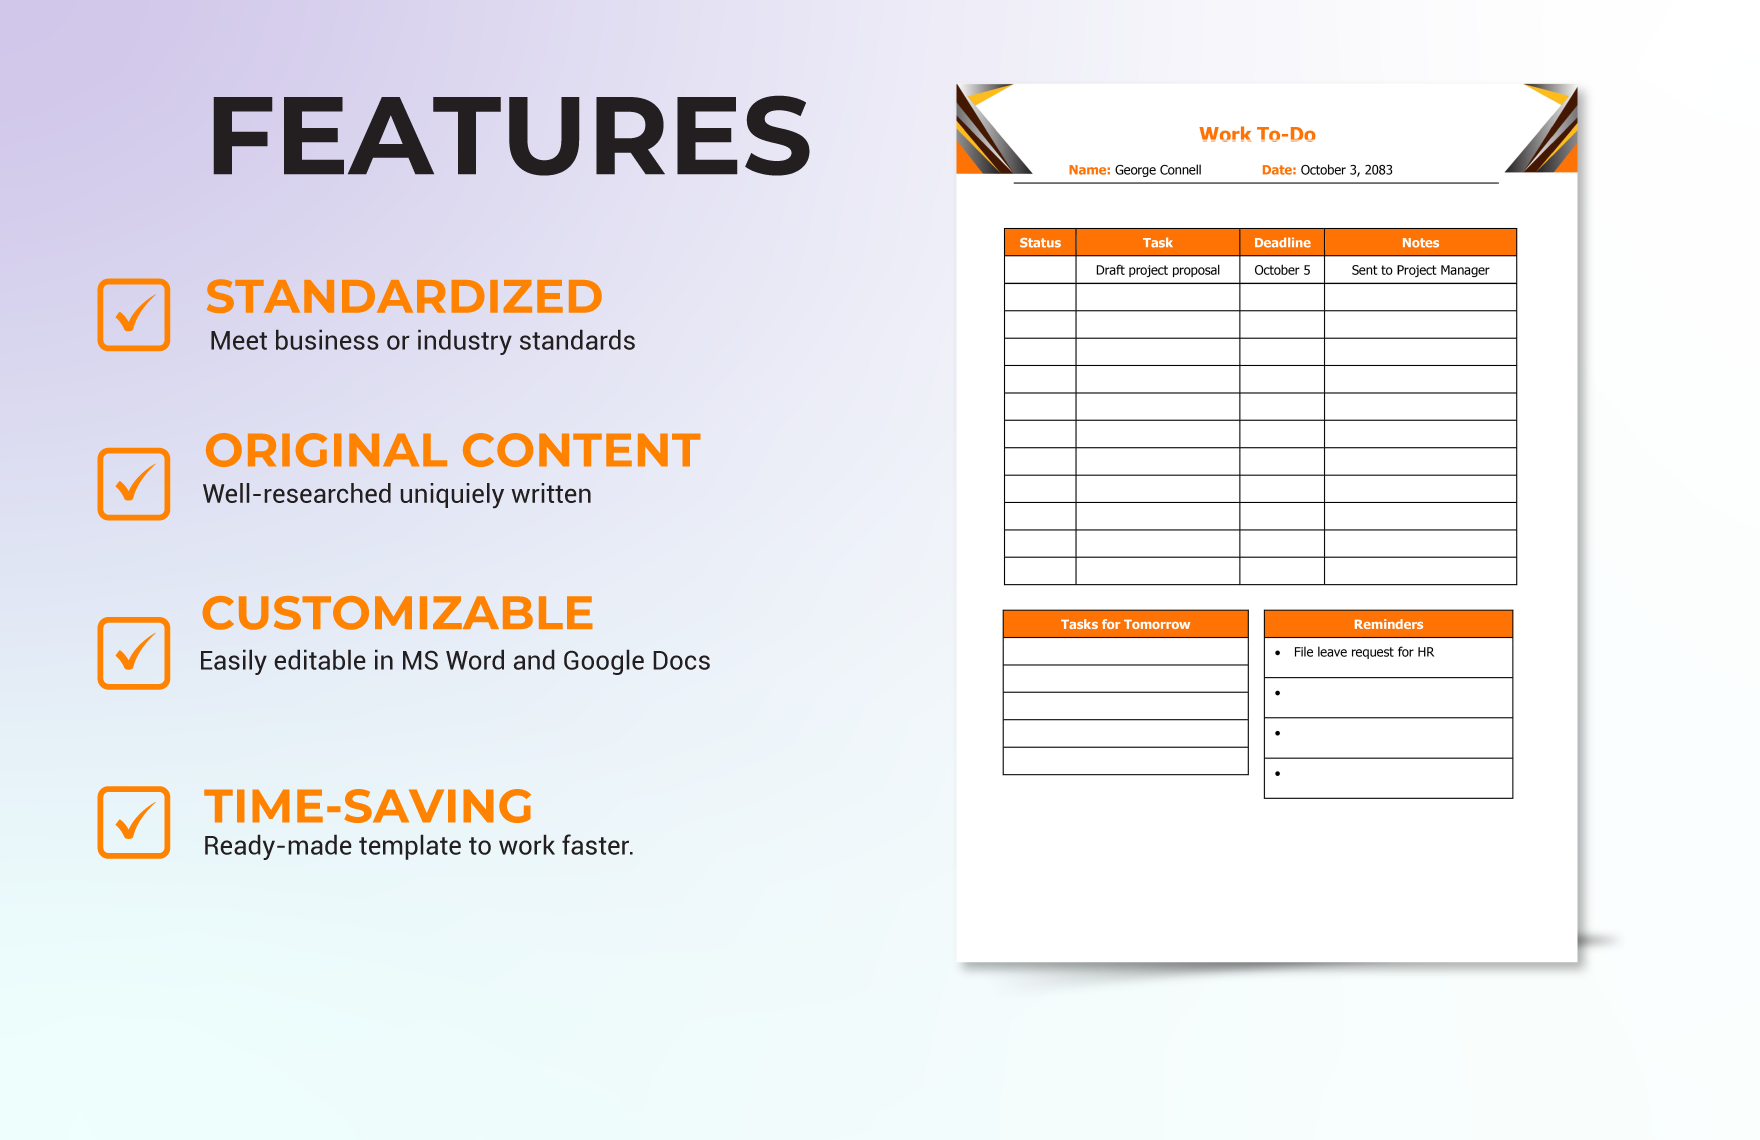 Work To-Do Template